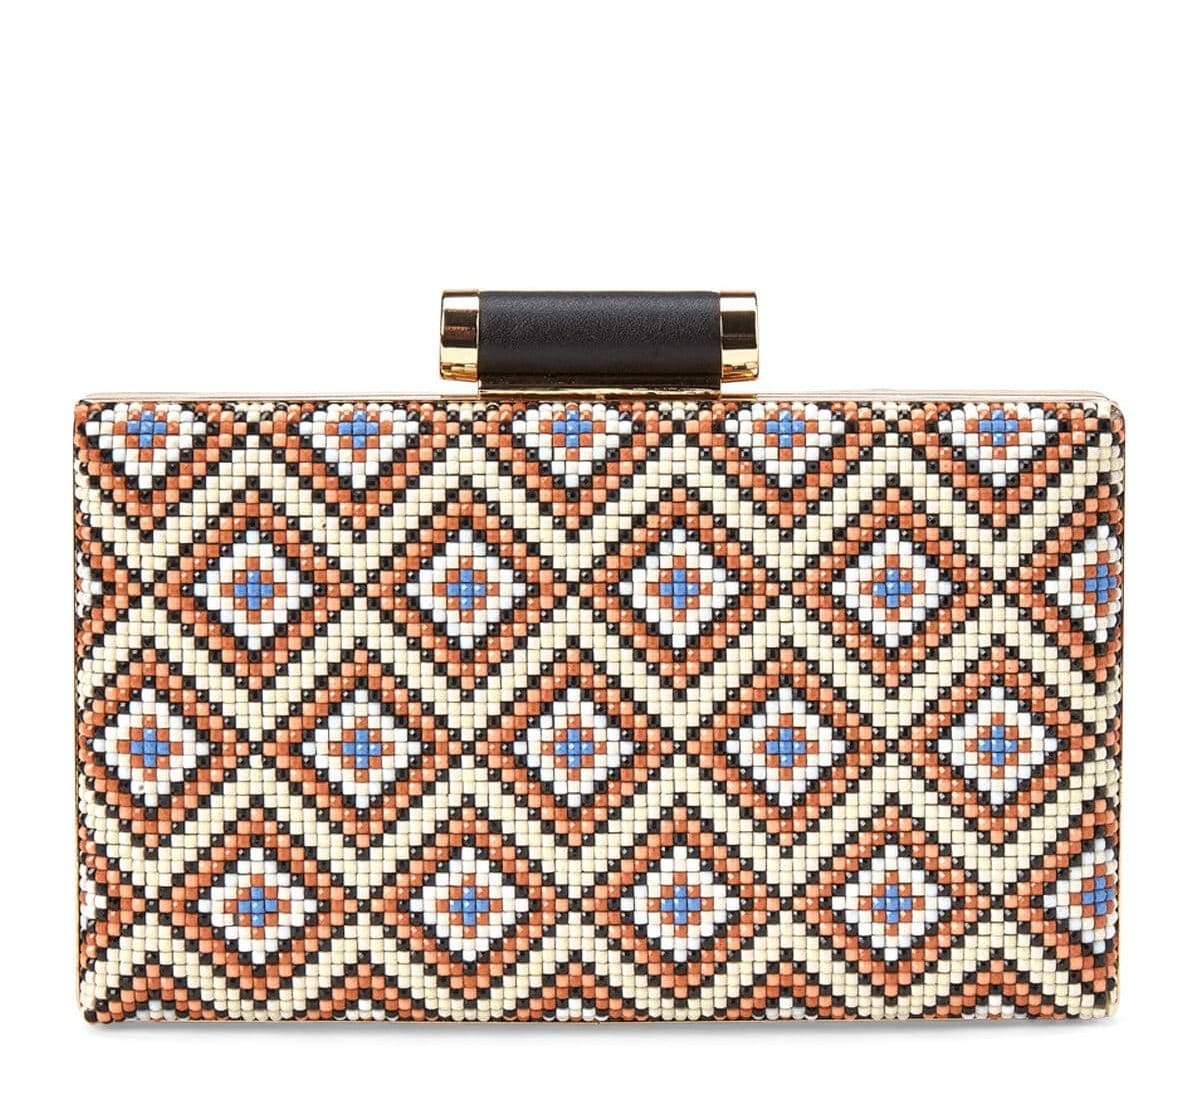 Tory beaded Convertible Clutch For Fall Winter Spring Summer